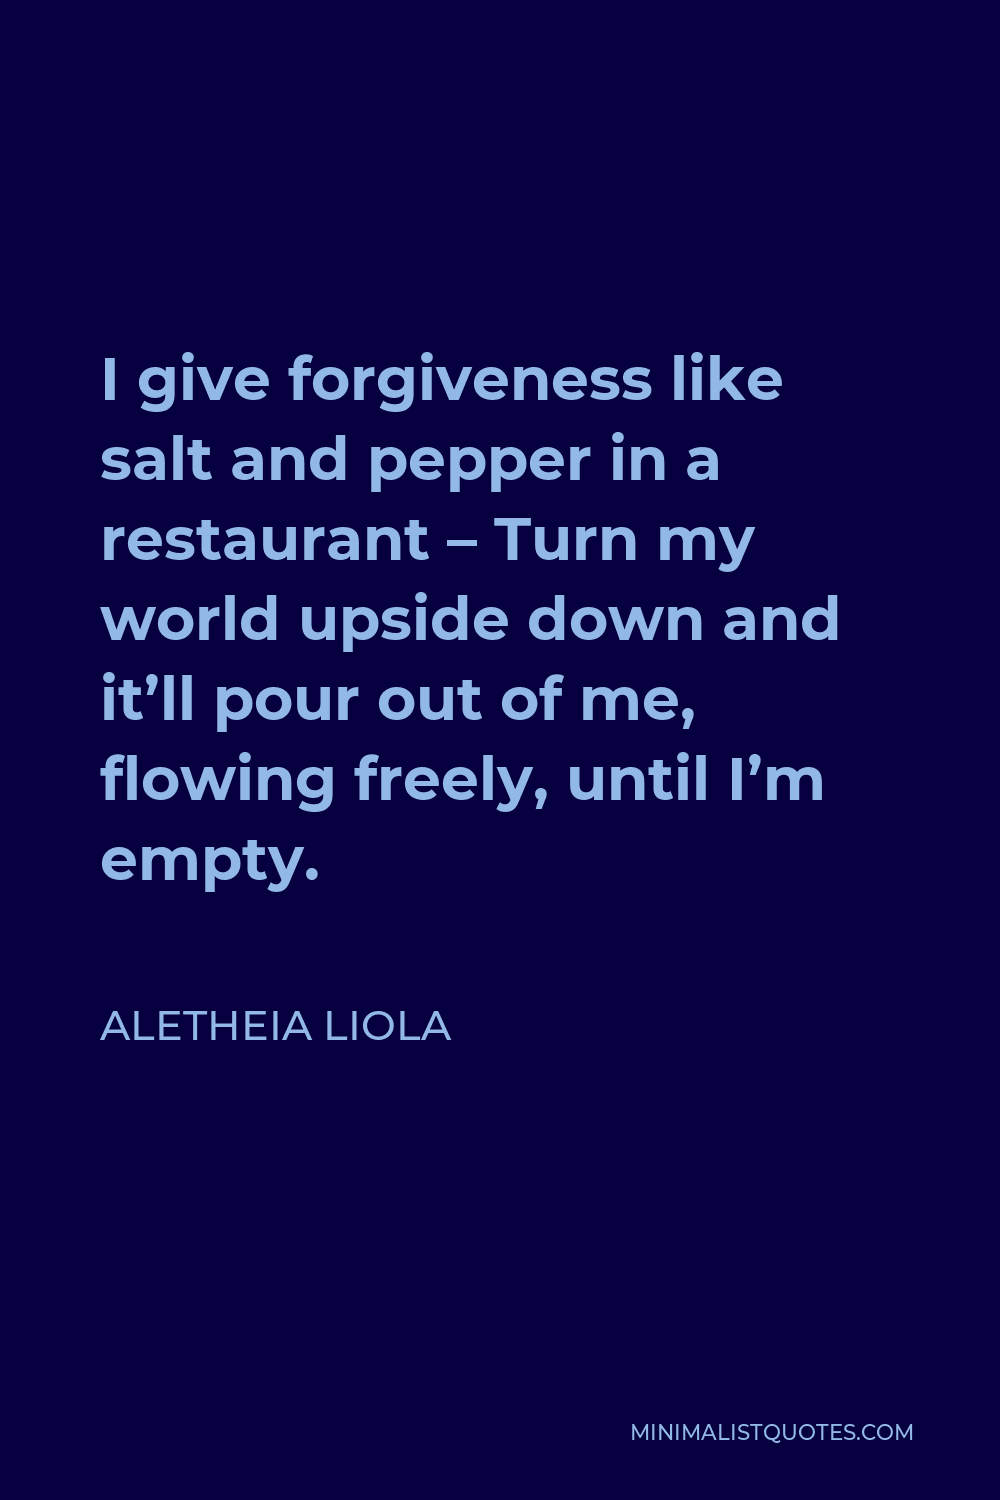 Aletheia Liola Quote - I give forgiveness like salt and pepper in a restaurant – Turn my world upside down and it’ll pour out of me, flowing freely, until I’m empty.